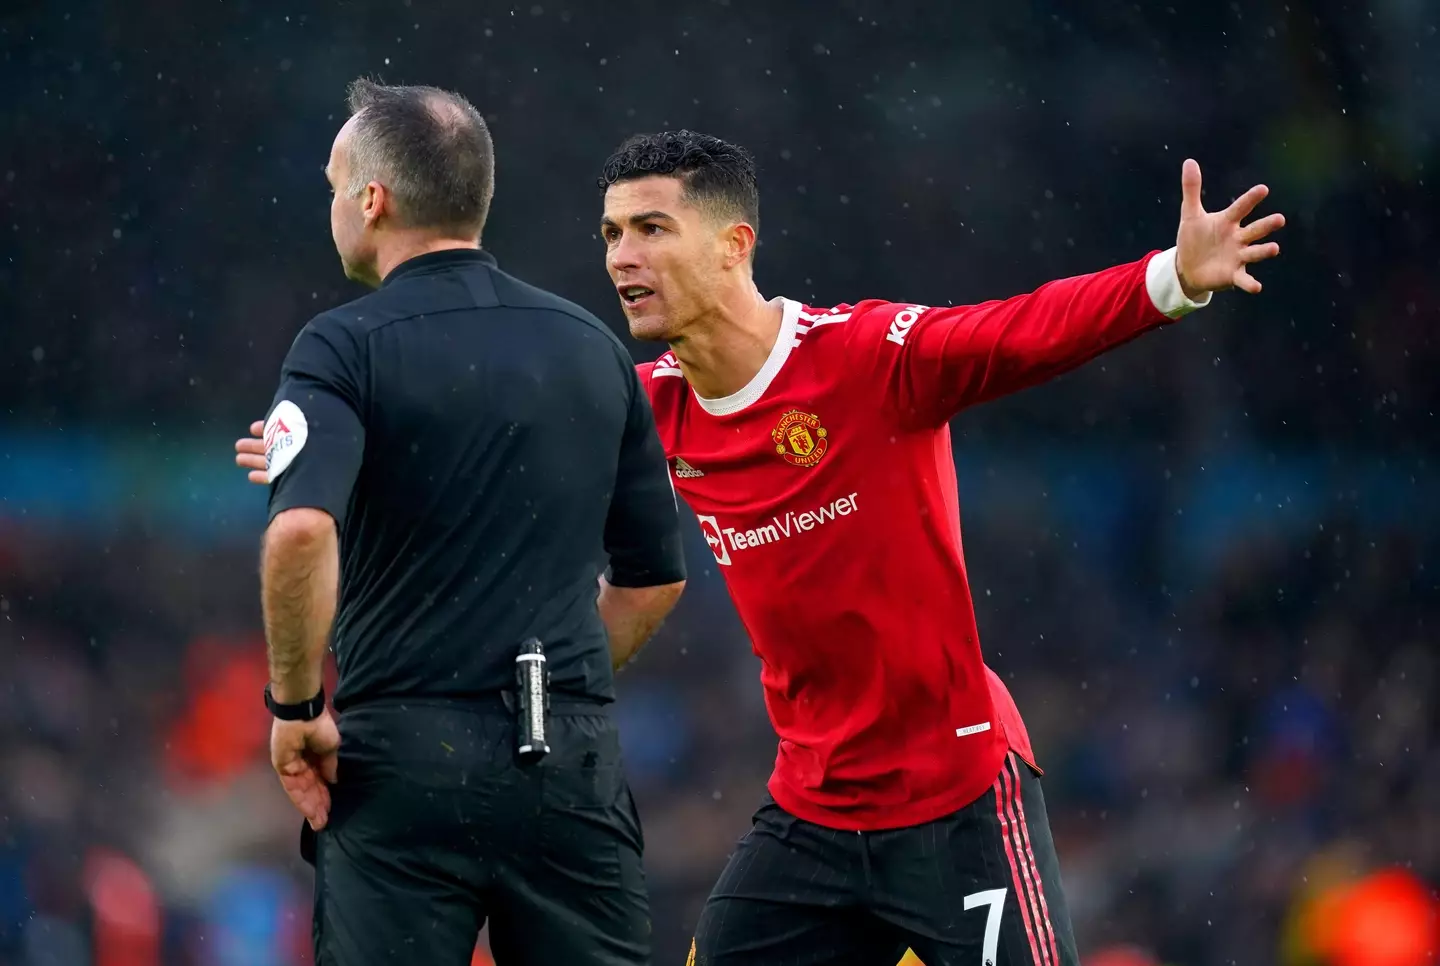 Ronaldo remonstrates with the referee during United's win over Leeds. Image: PA Images